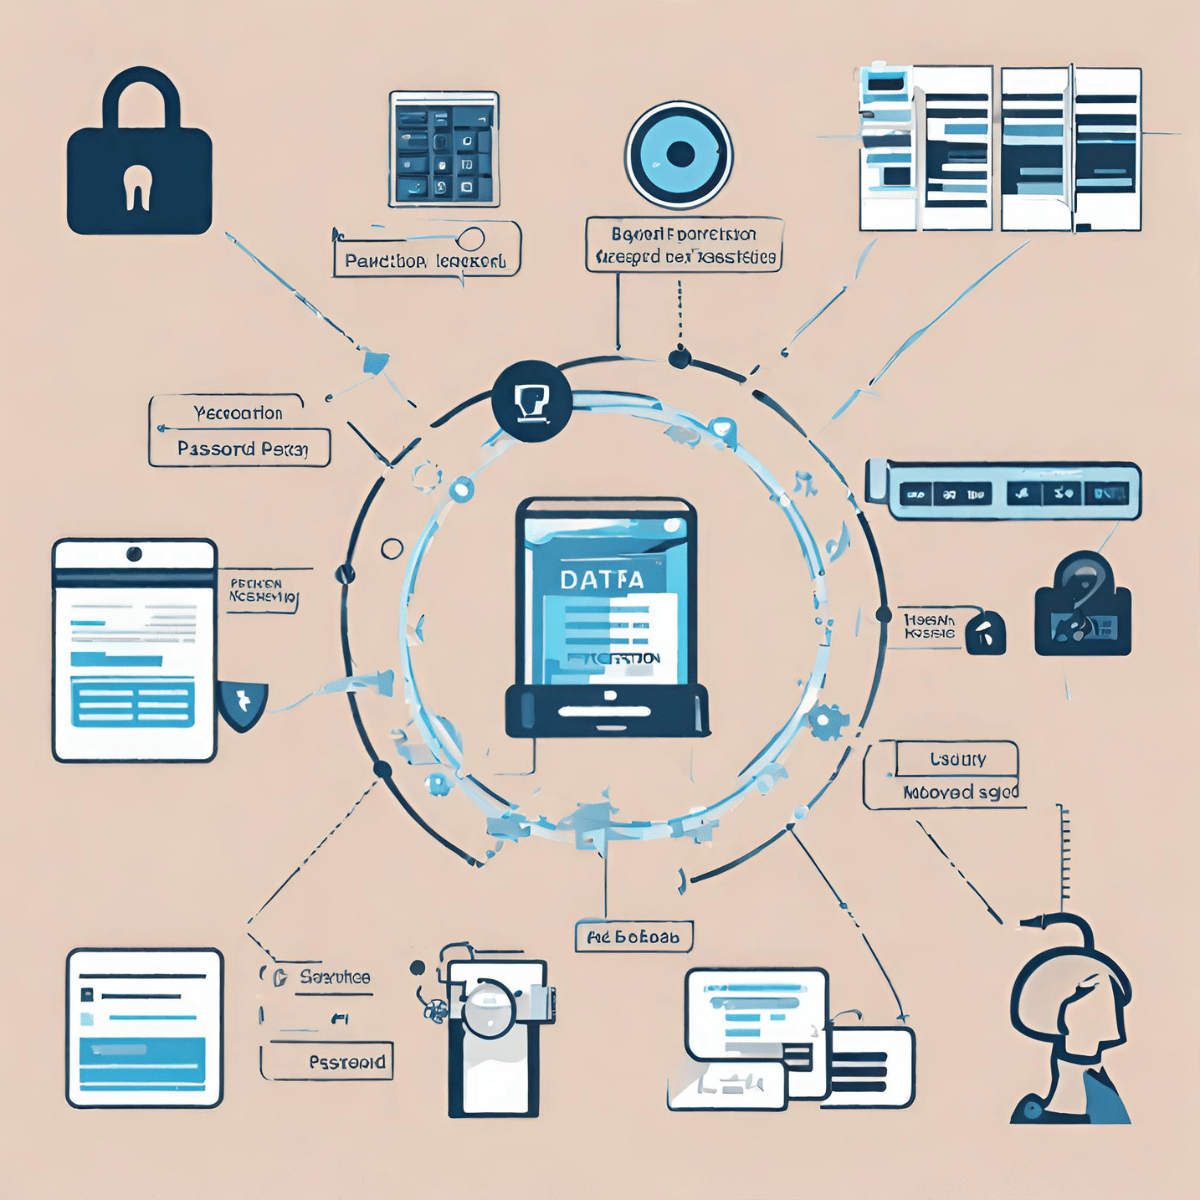 Visual representation of data protection measures, including encryption, backup, and password protection